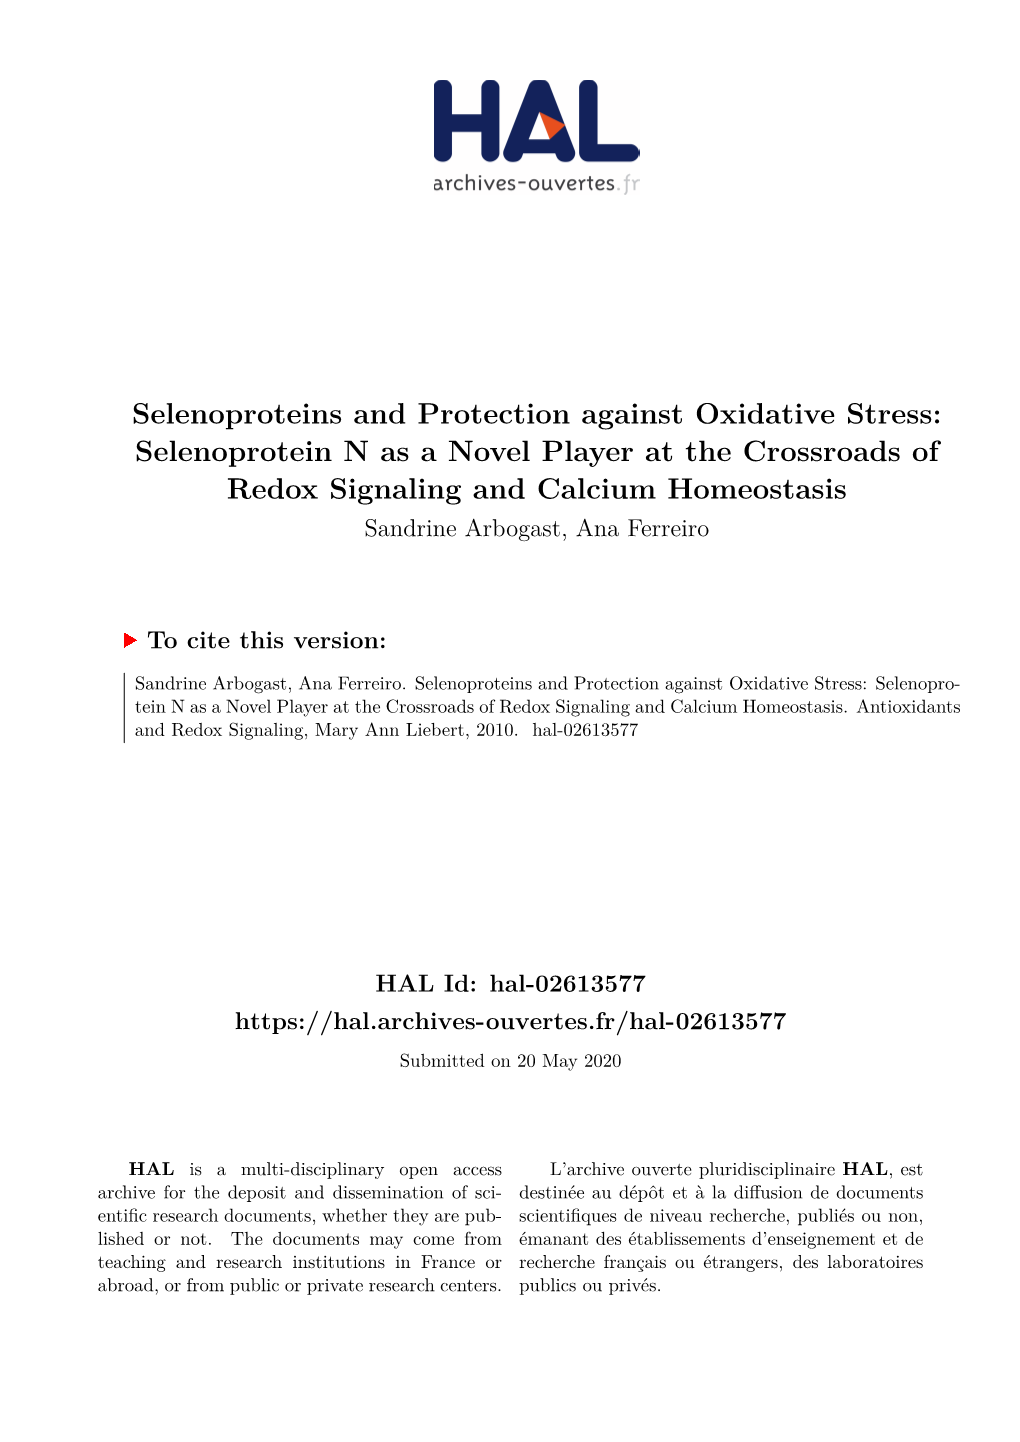 Selenoproteins and Protection Against Oxidative